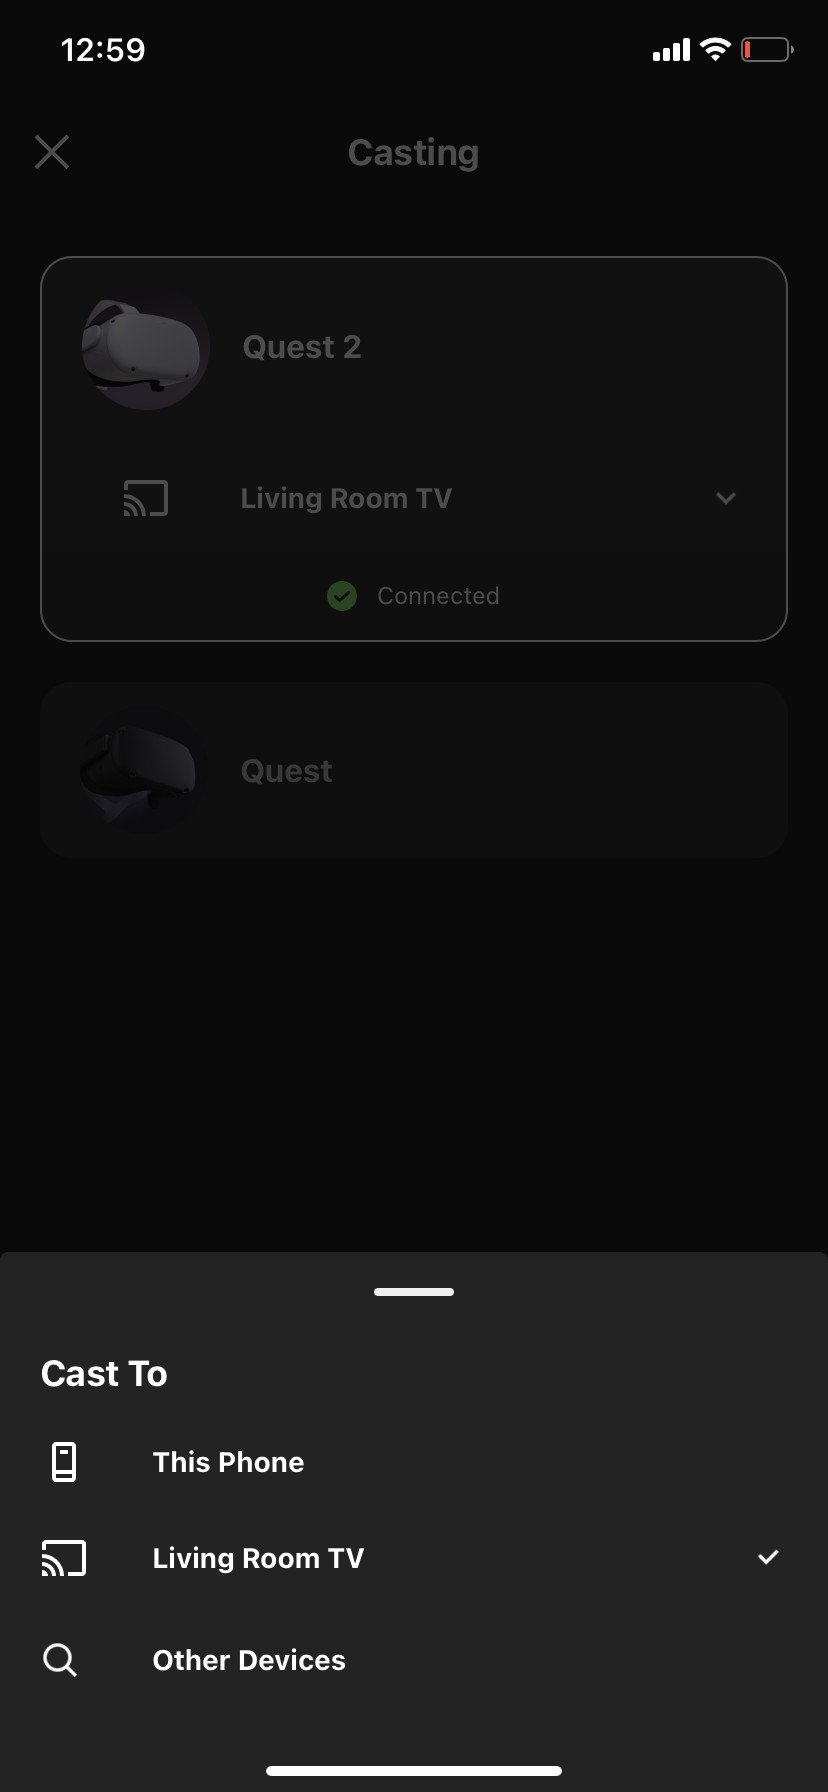 Oculus app sub-menu for casting to different devices